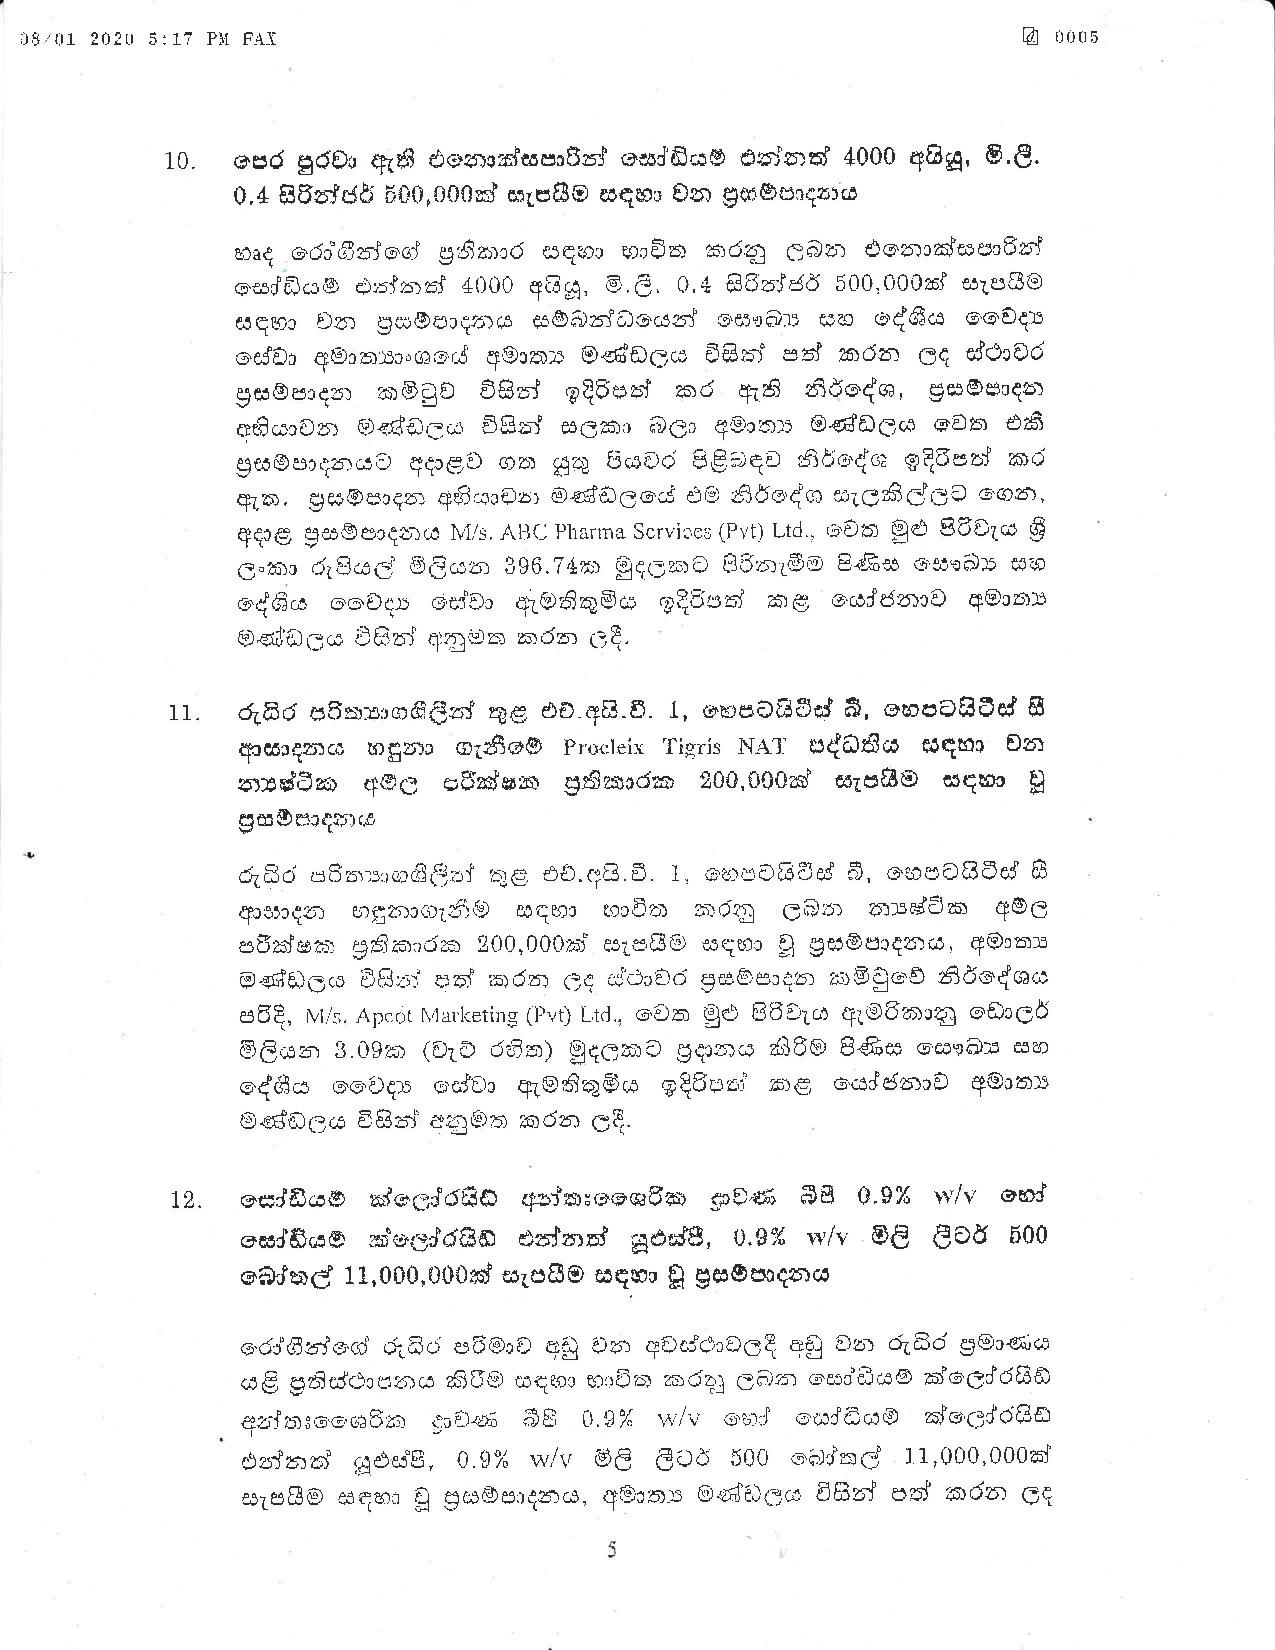 Cabinet Decision on 08.01.2020 page 005